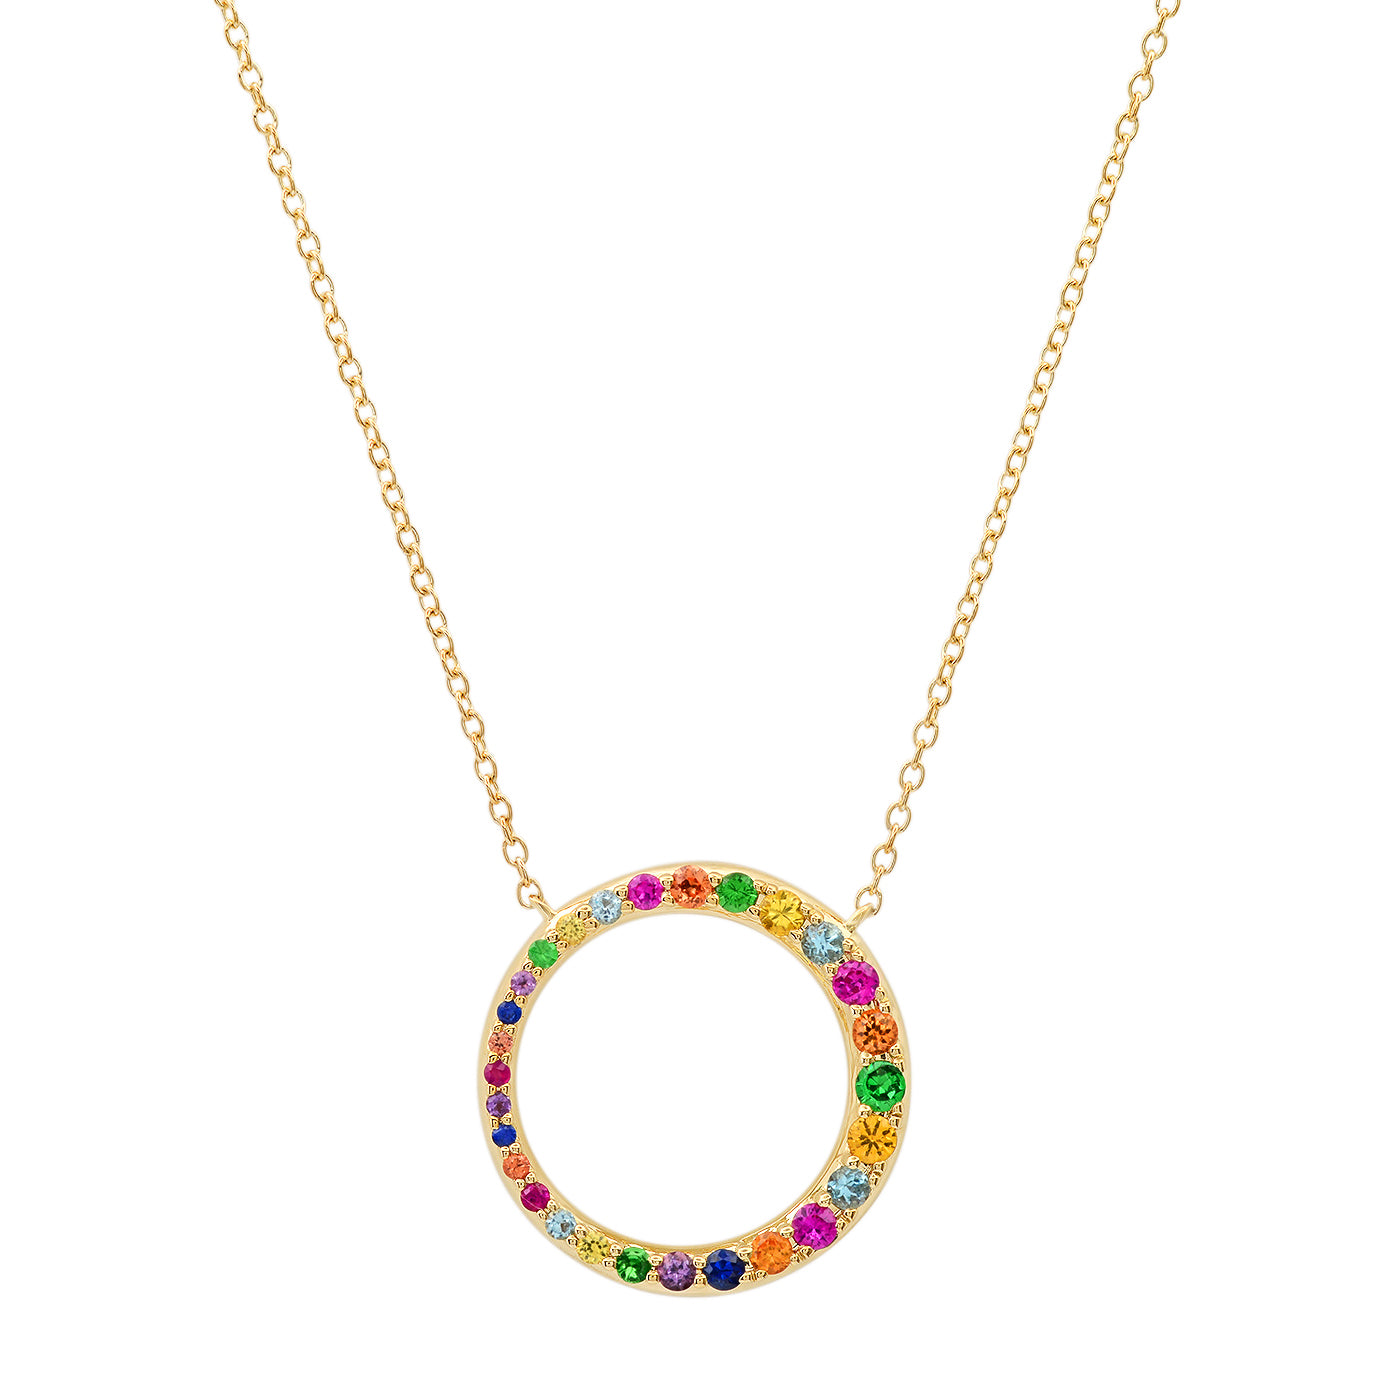 14K Yellow Gold Asymmetrical Multi Colored Loop Necklace